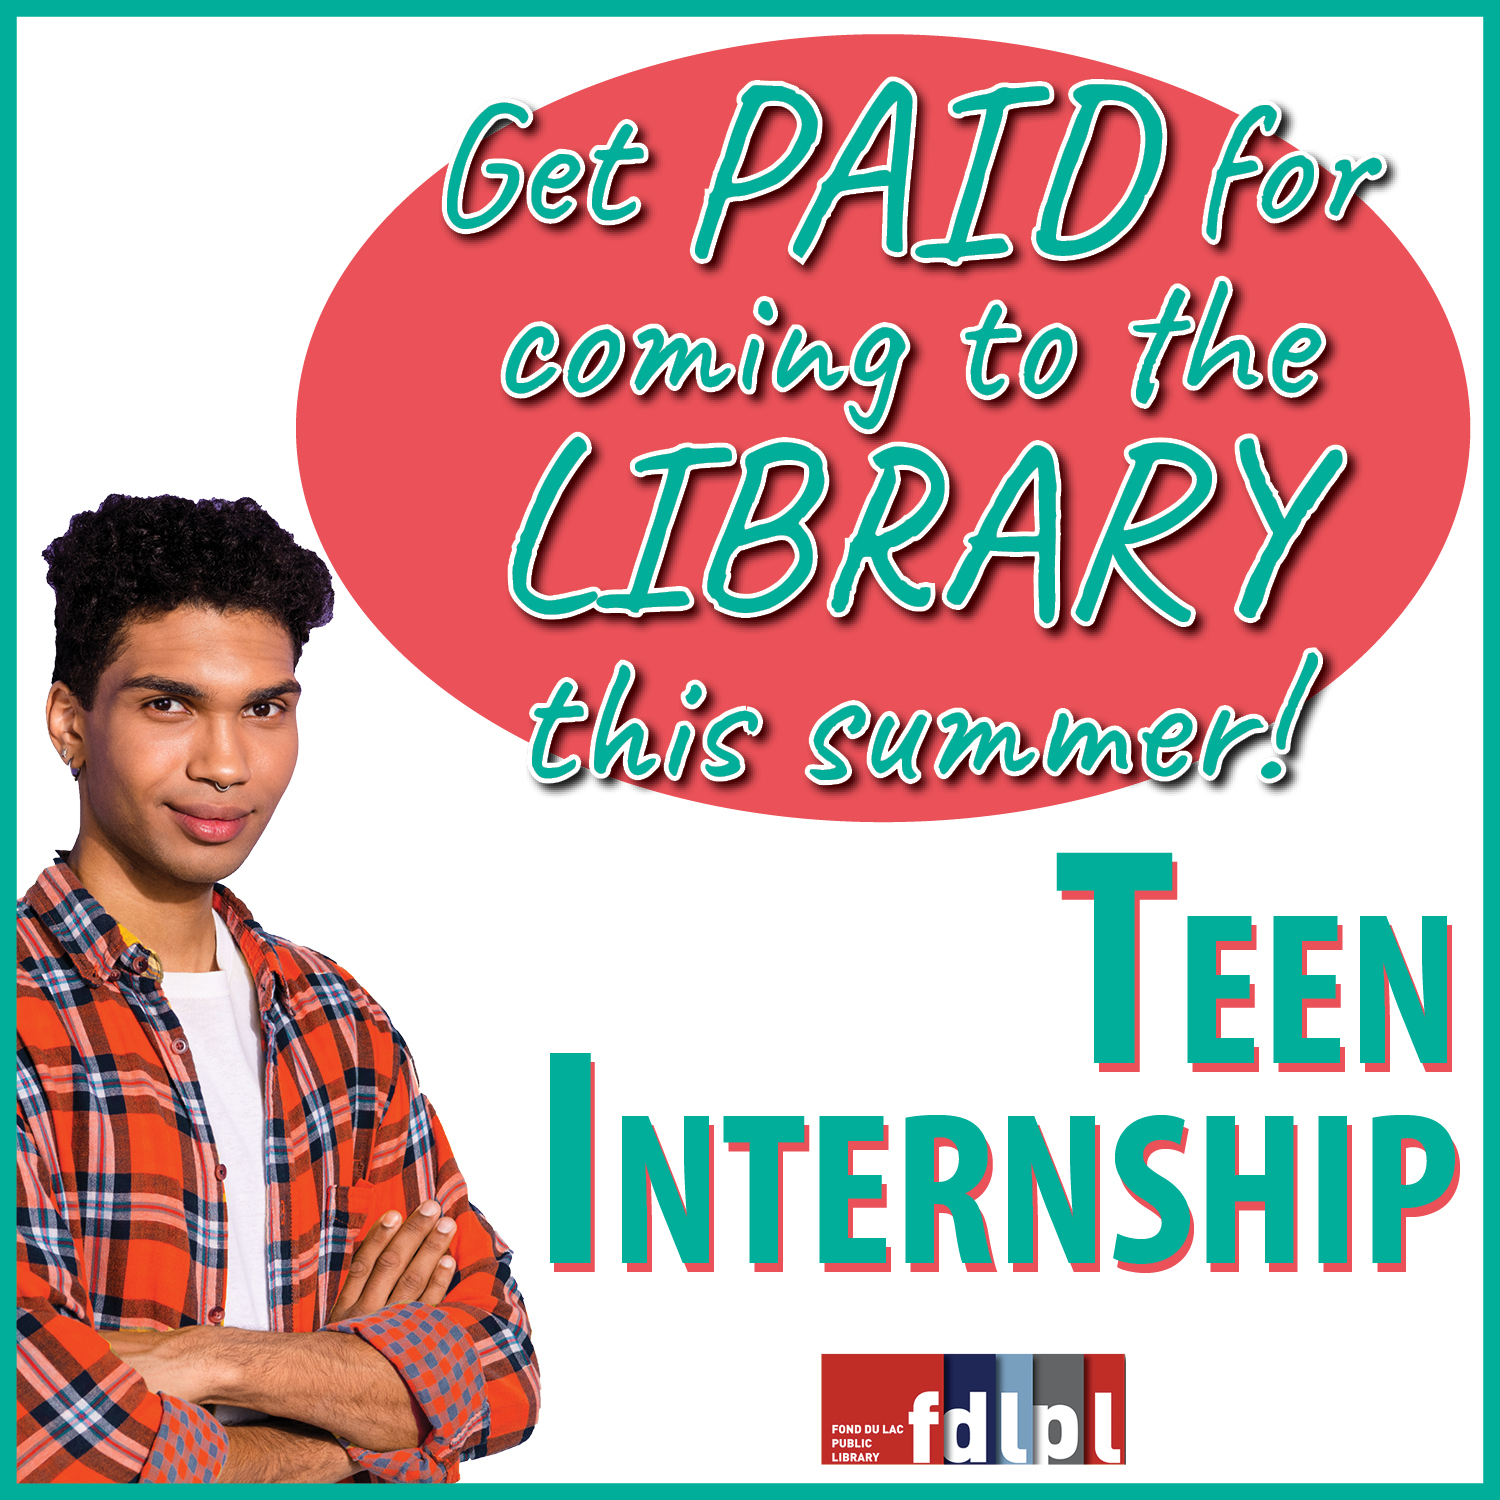 A teen with arms crossed over their chest smiles at the camera. Text reads "Get PAID for coming to the LIBRARY this summer! TEEN INTERNSHIP" above the Fond du Lac Public Library logo